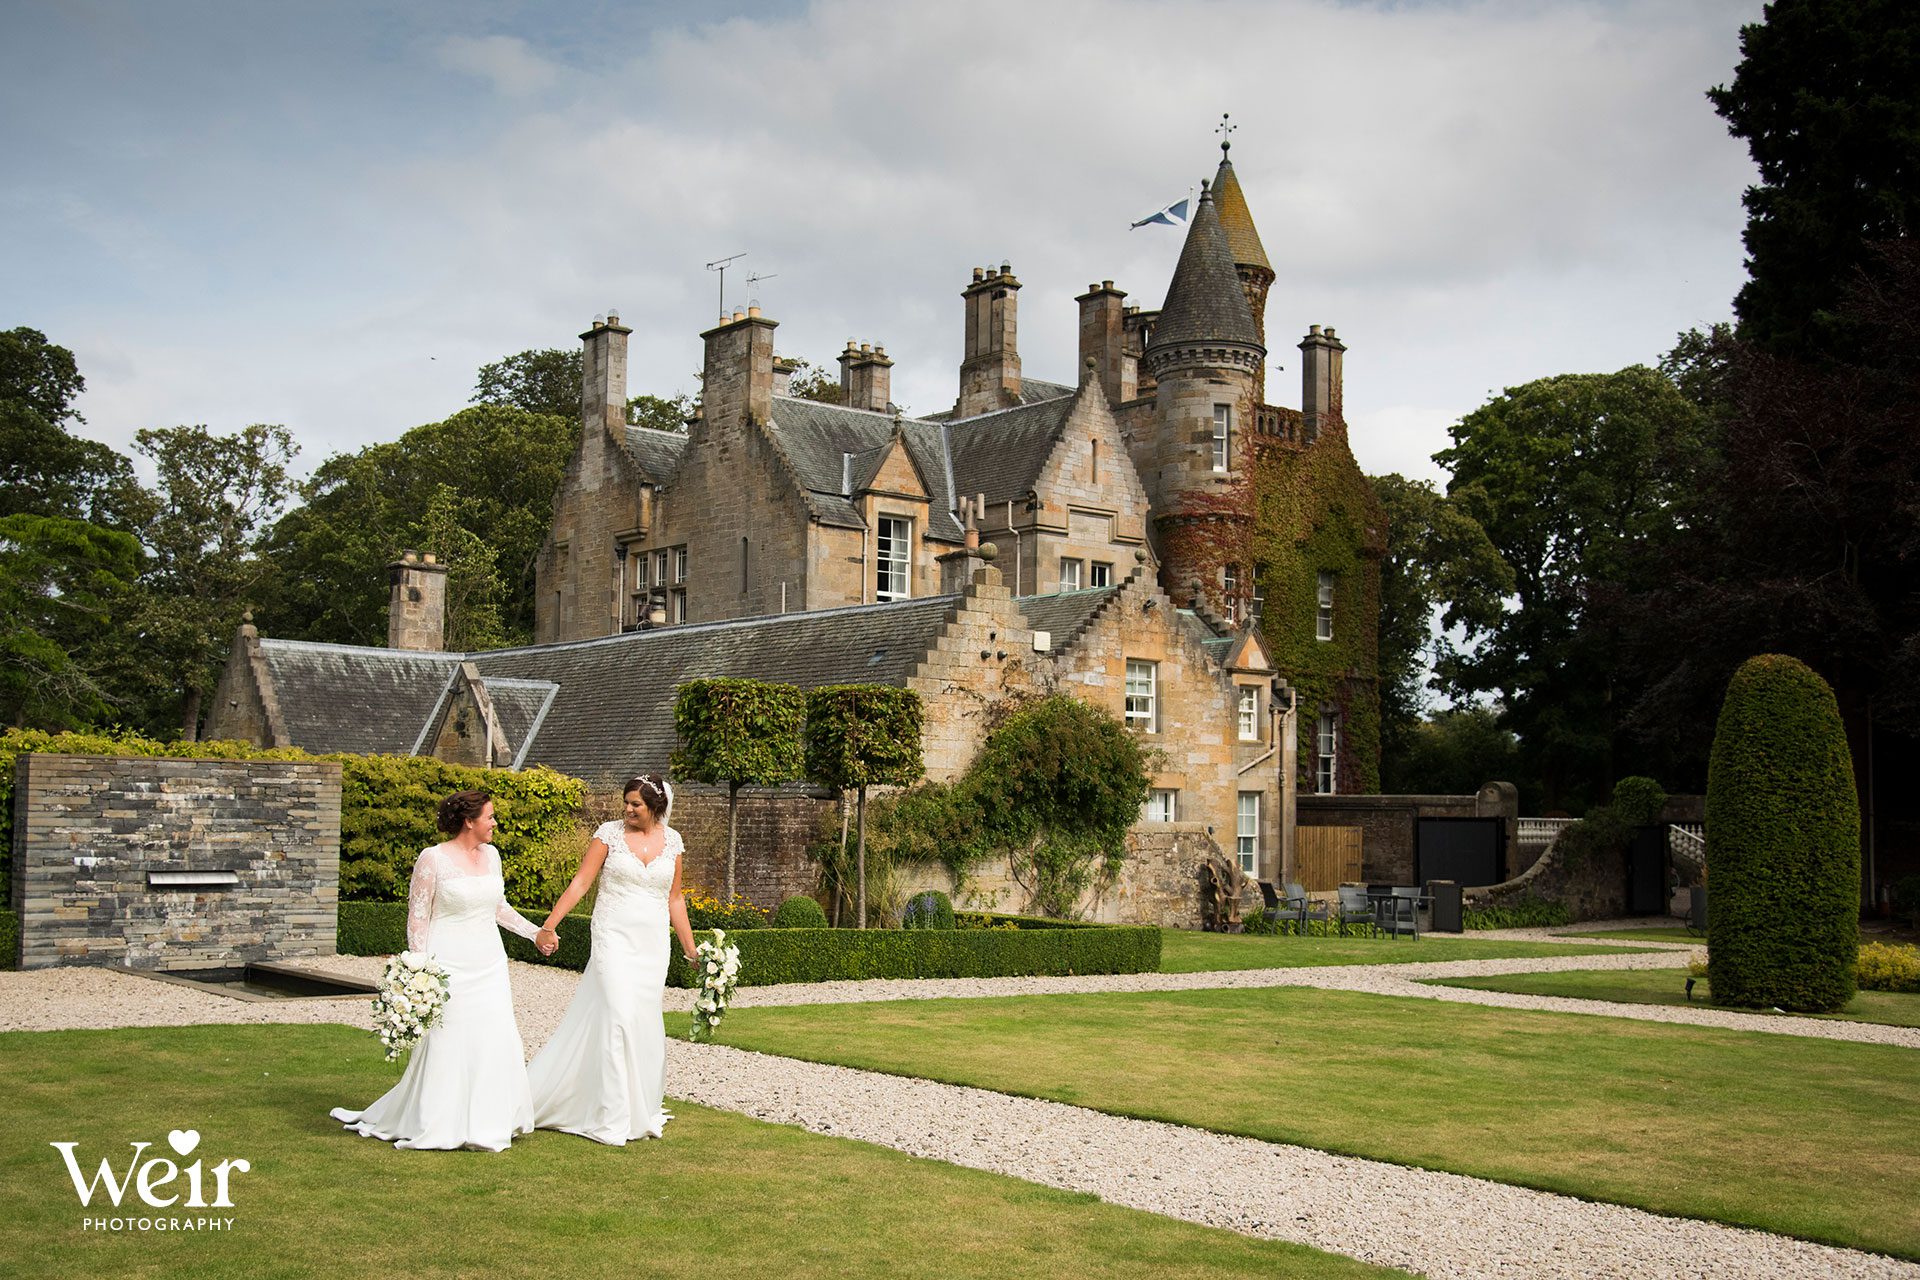 Bride & Bride in grounds of Carlowrie Castle